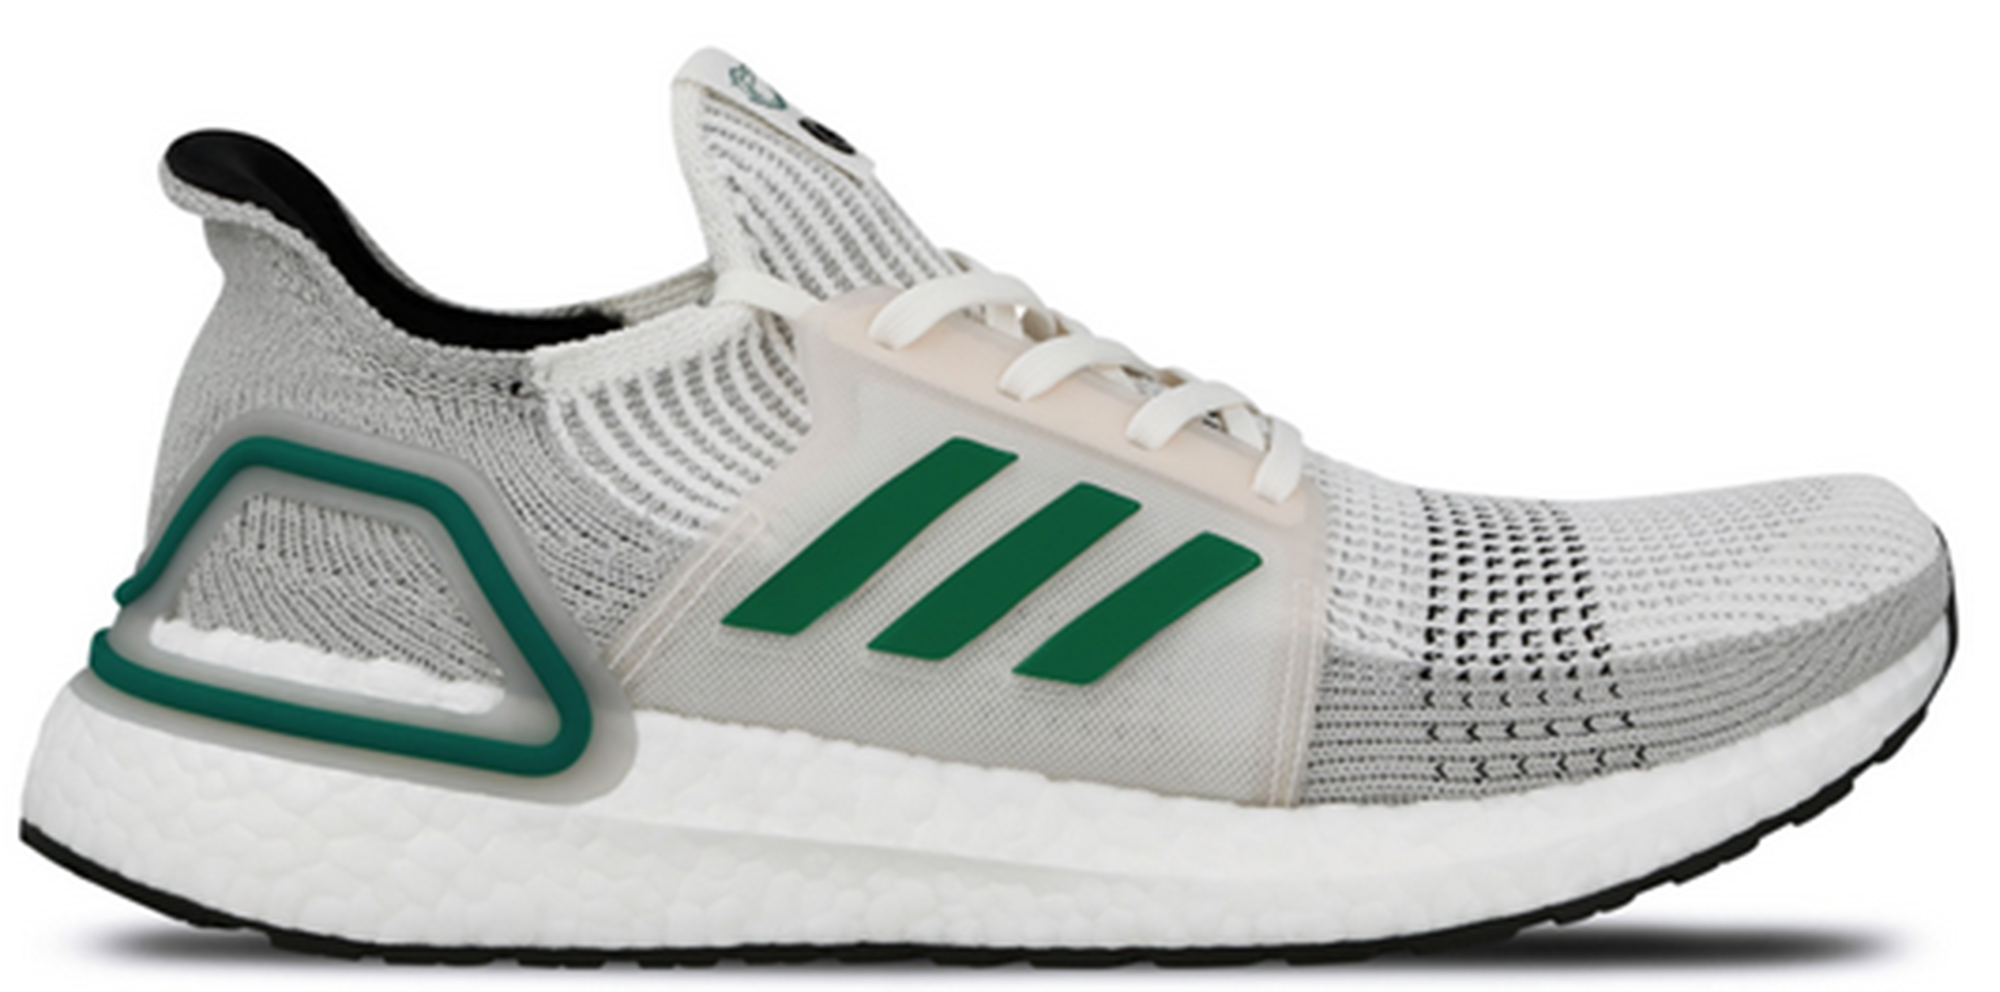 adidas Ultra Boost 2019 White Green - EE7517